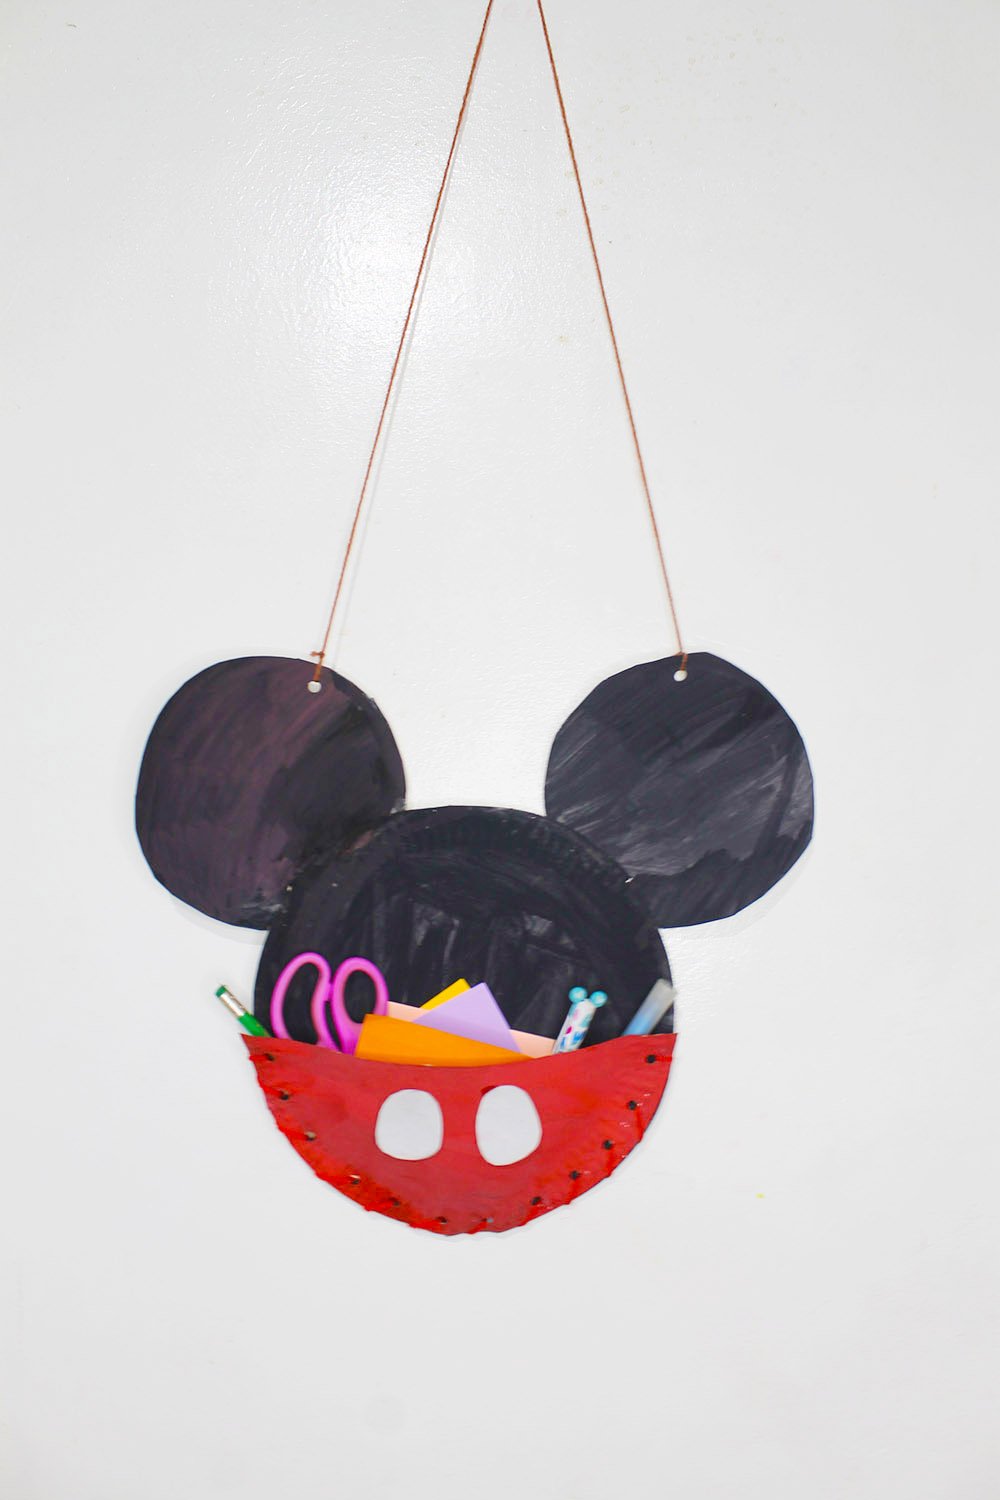 How to Make a Paper Plate Mouse - Step 33